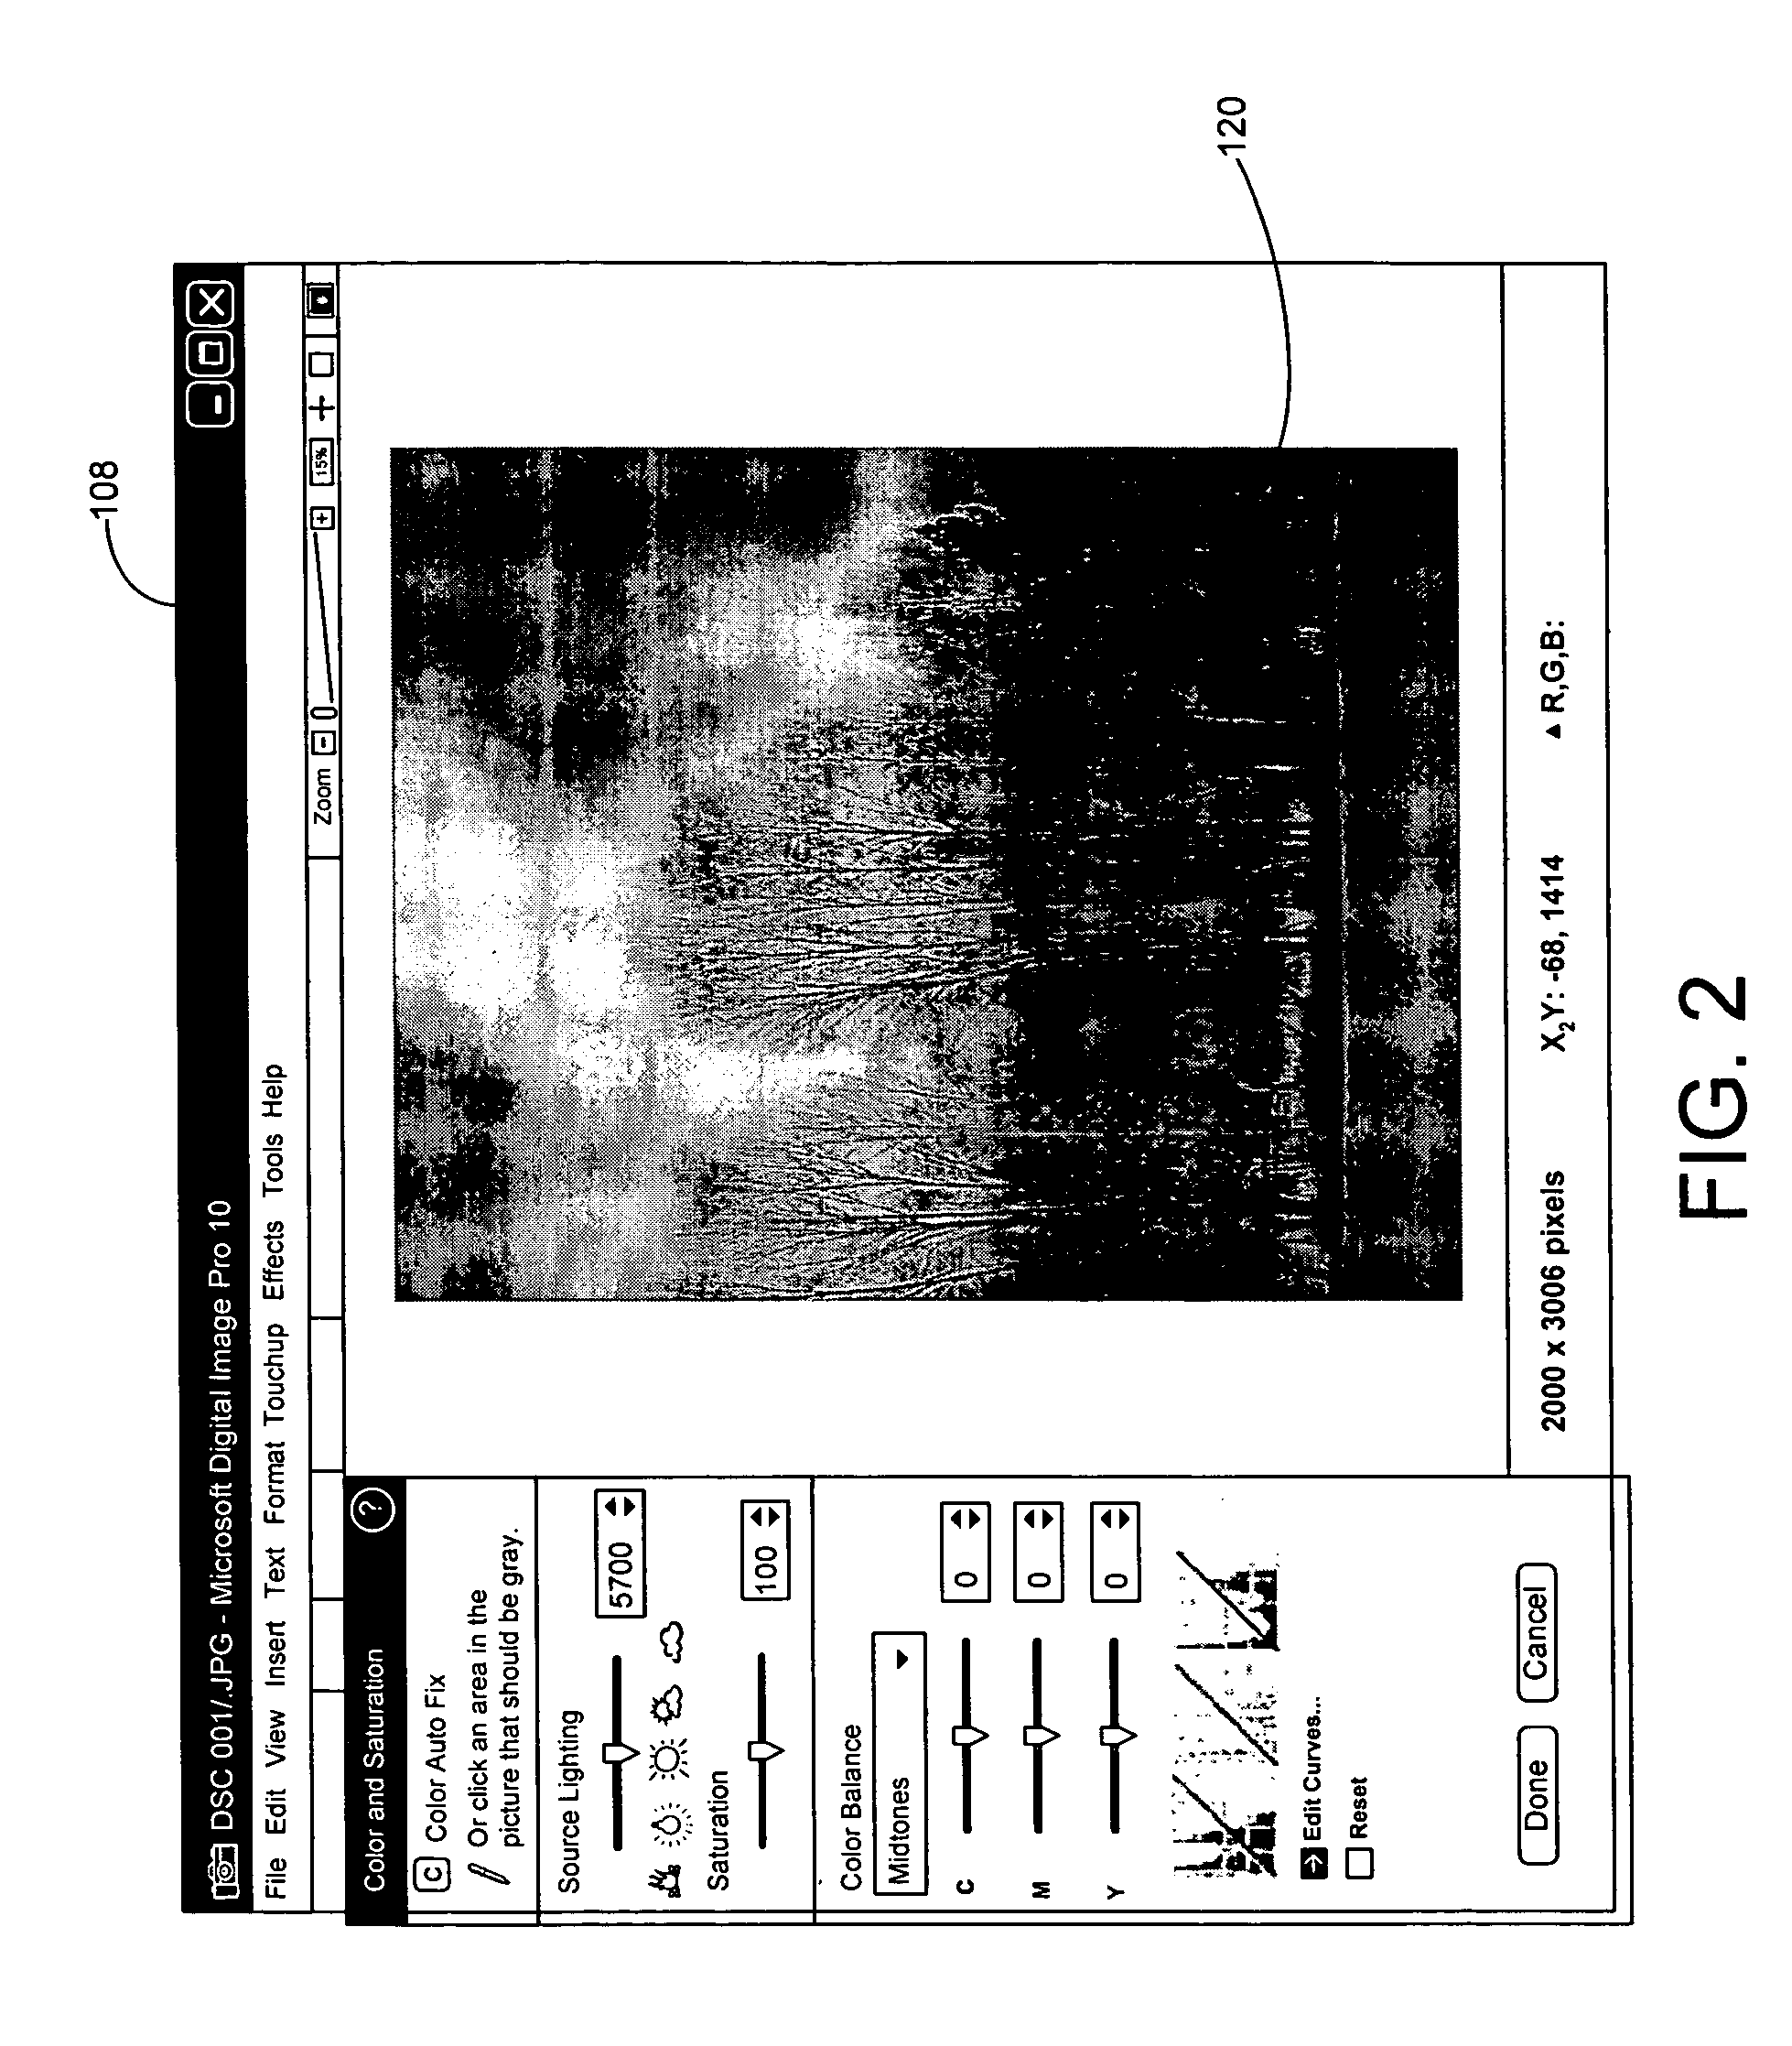 System and method for controlling dynamically interactive parameters for image processing